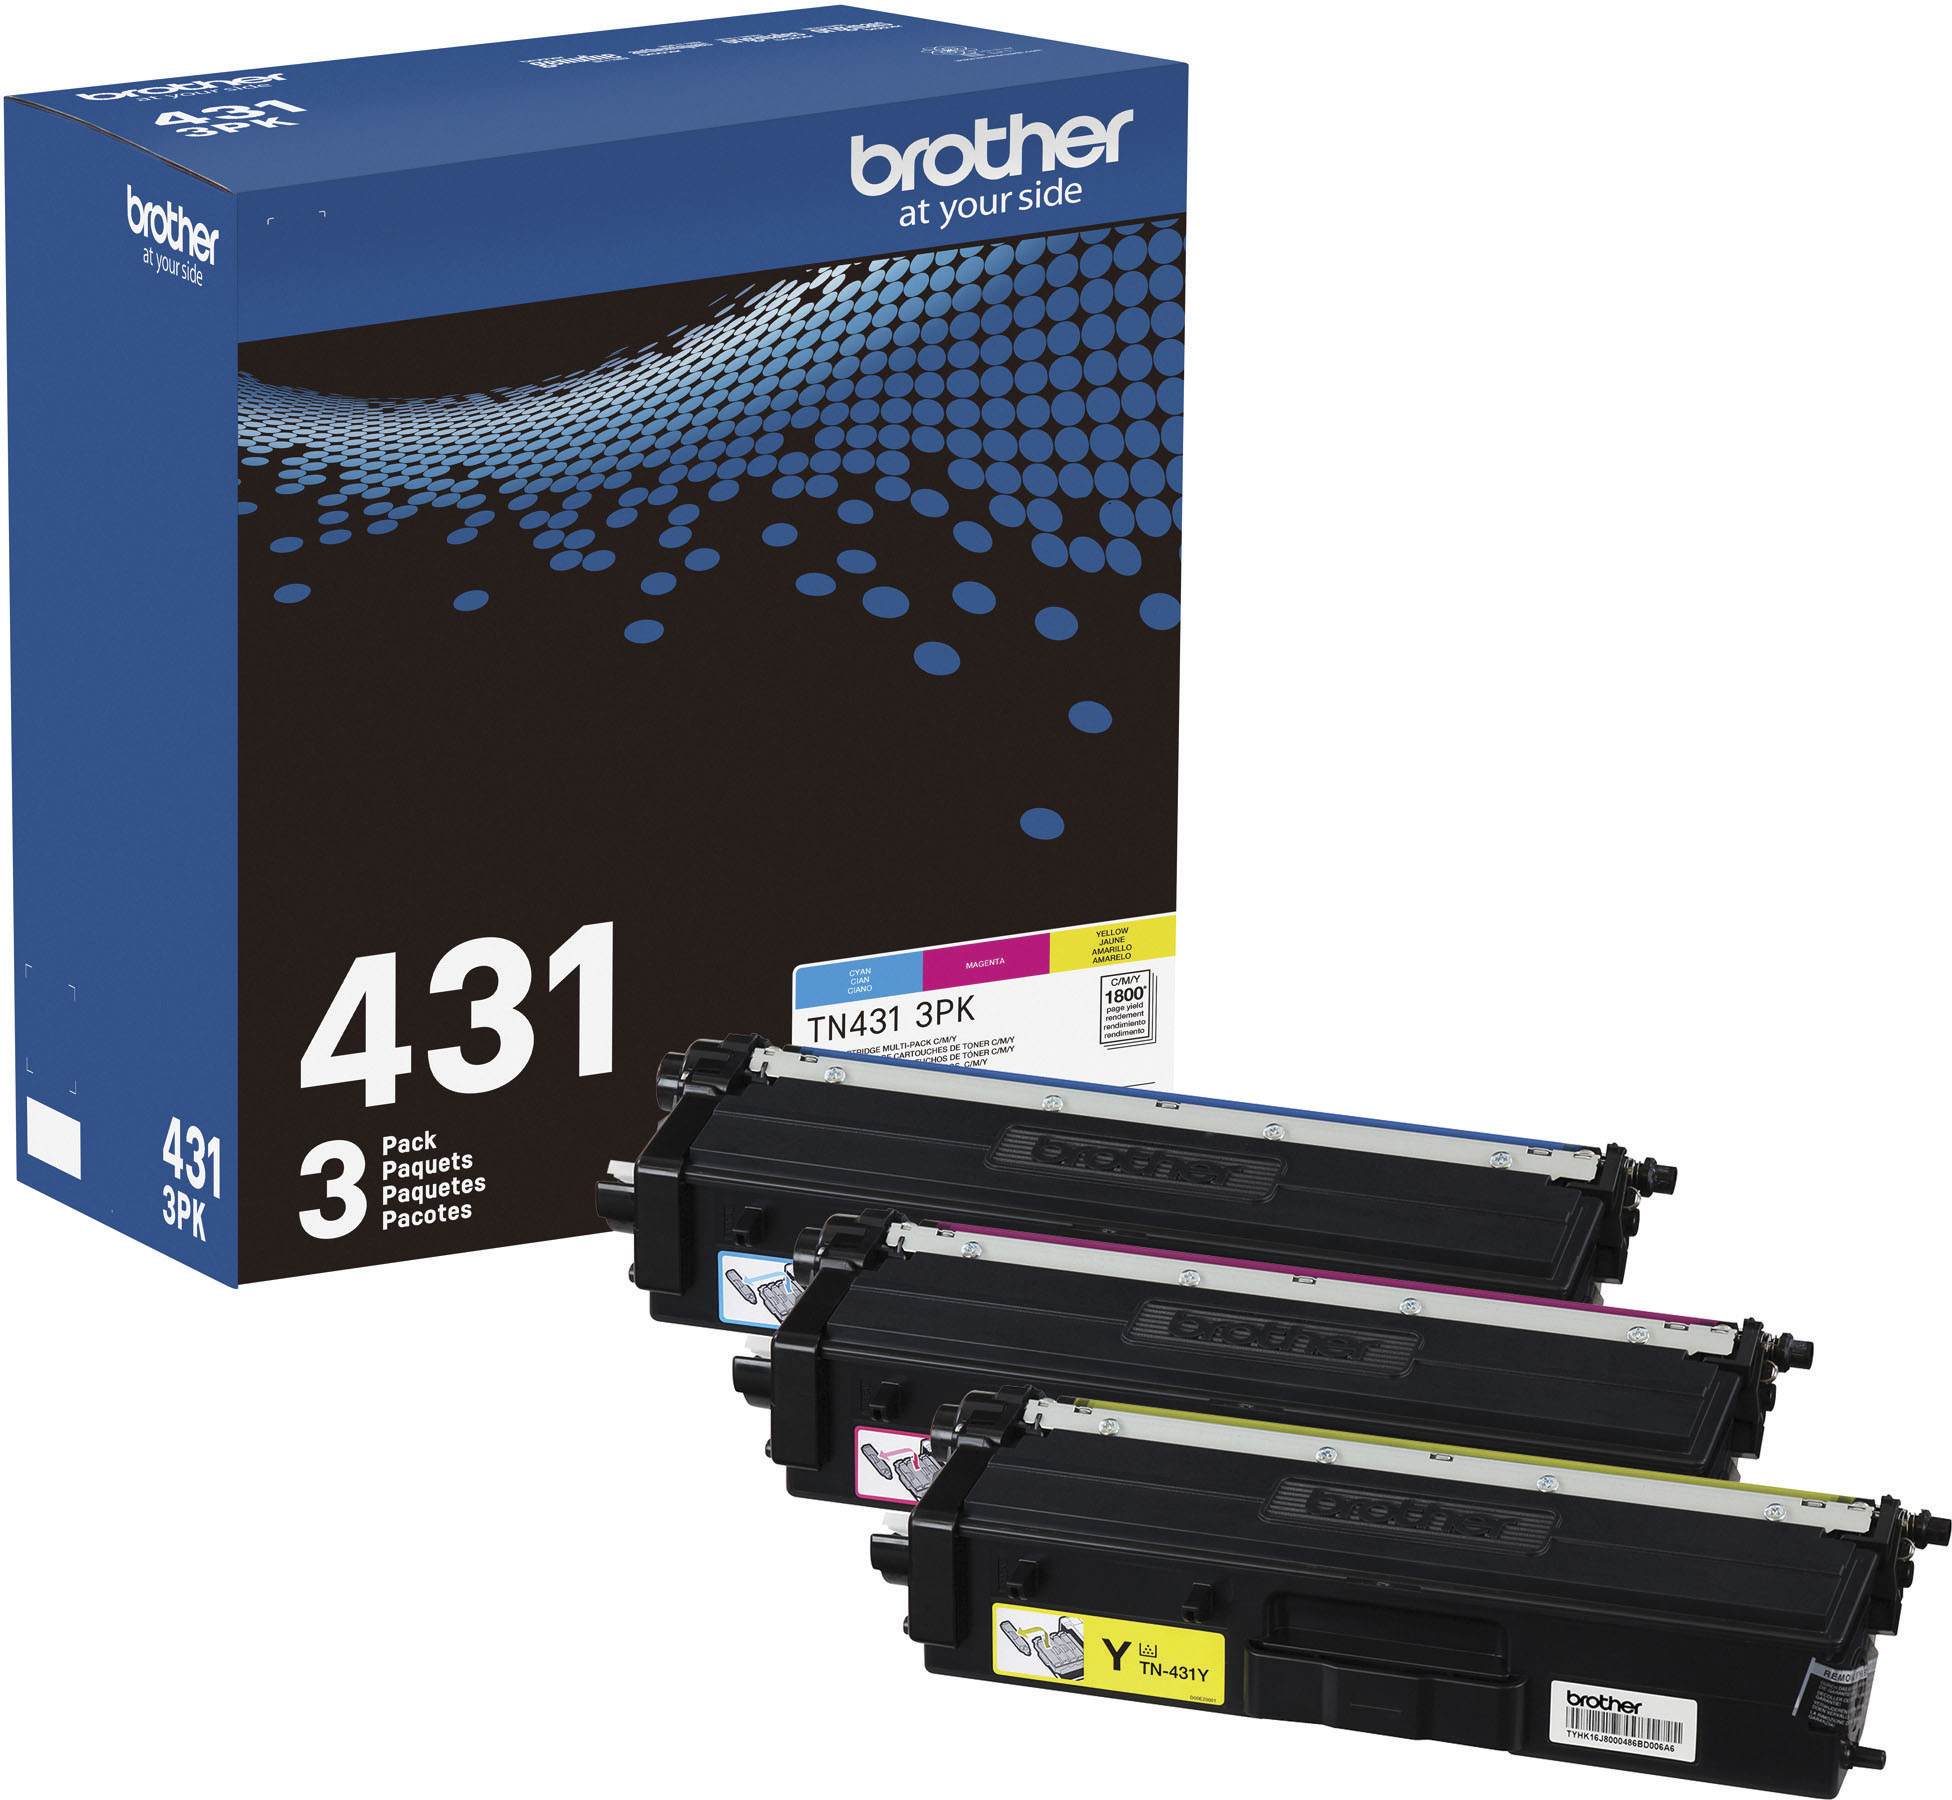  Brother Genuine Standard-Yield Toner Cartridge Four Pack TN223  4PK - Includes one Cartridge Each of Black, Cyan, Magenta & Yellow Toner,  Standard Yield, Model: TN2234PK : Office Products